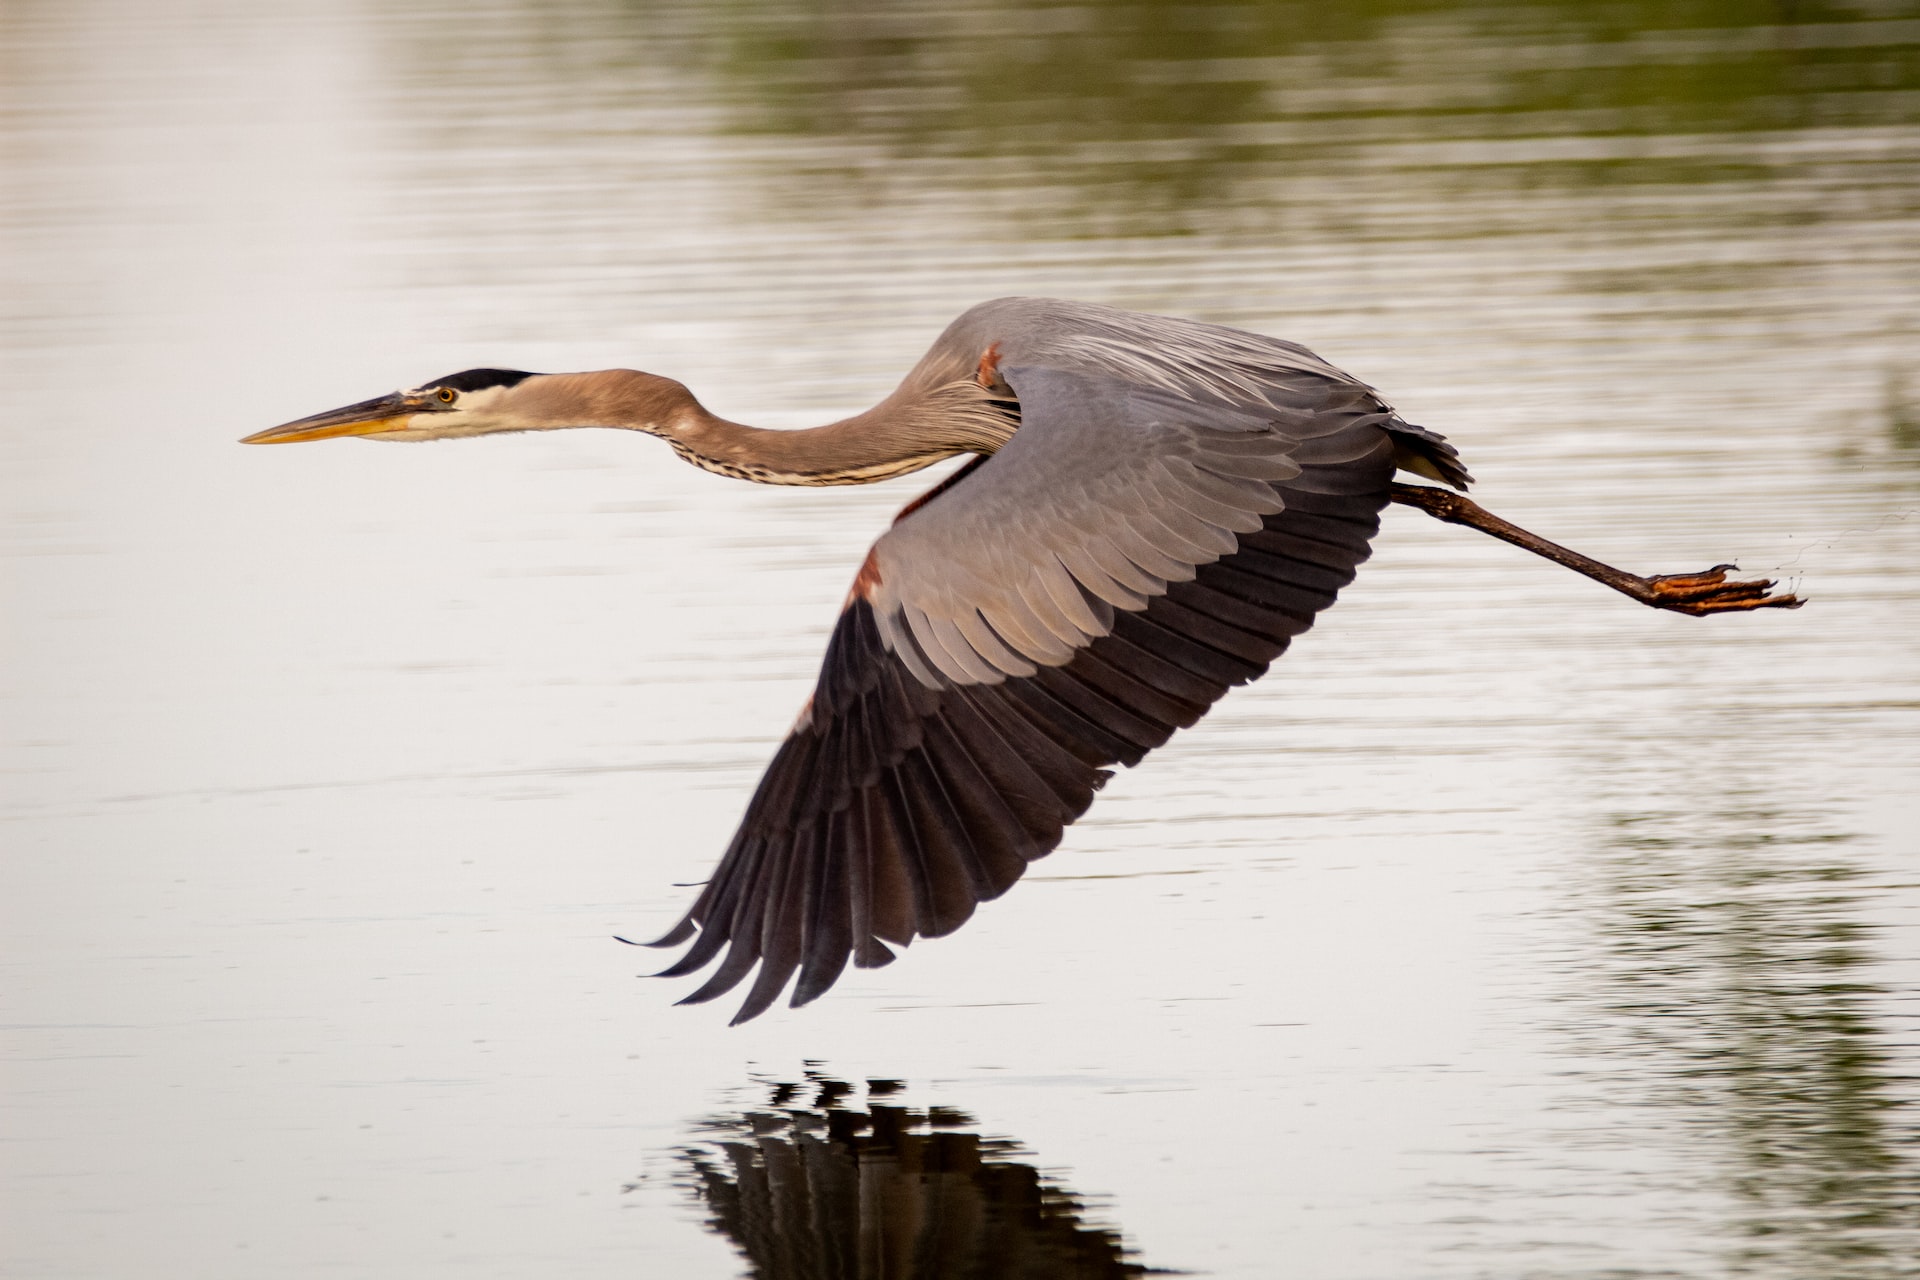 A great blue heron flying past, just over the water.